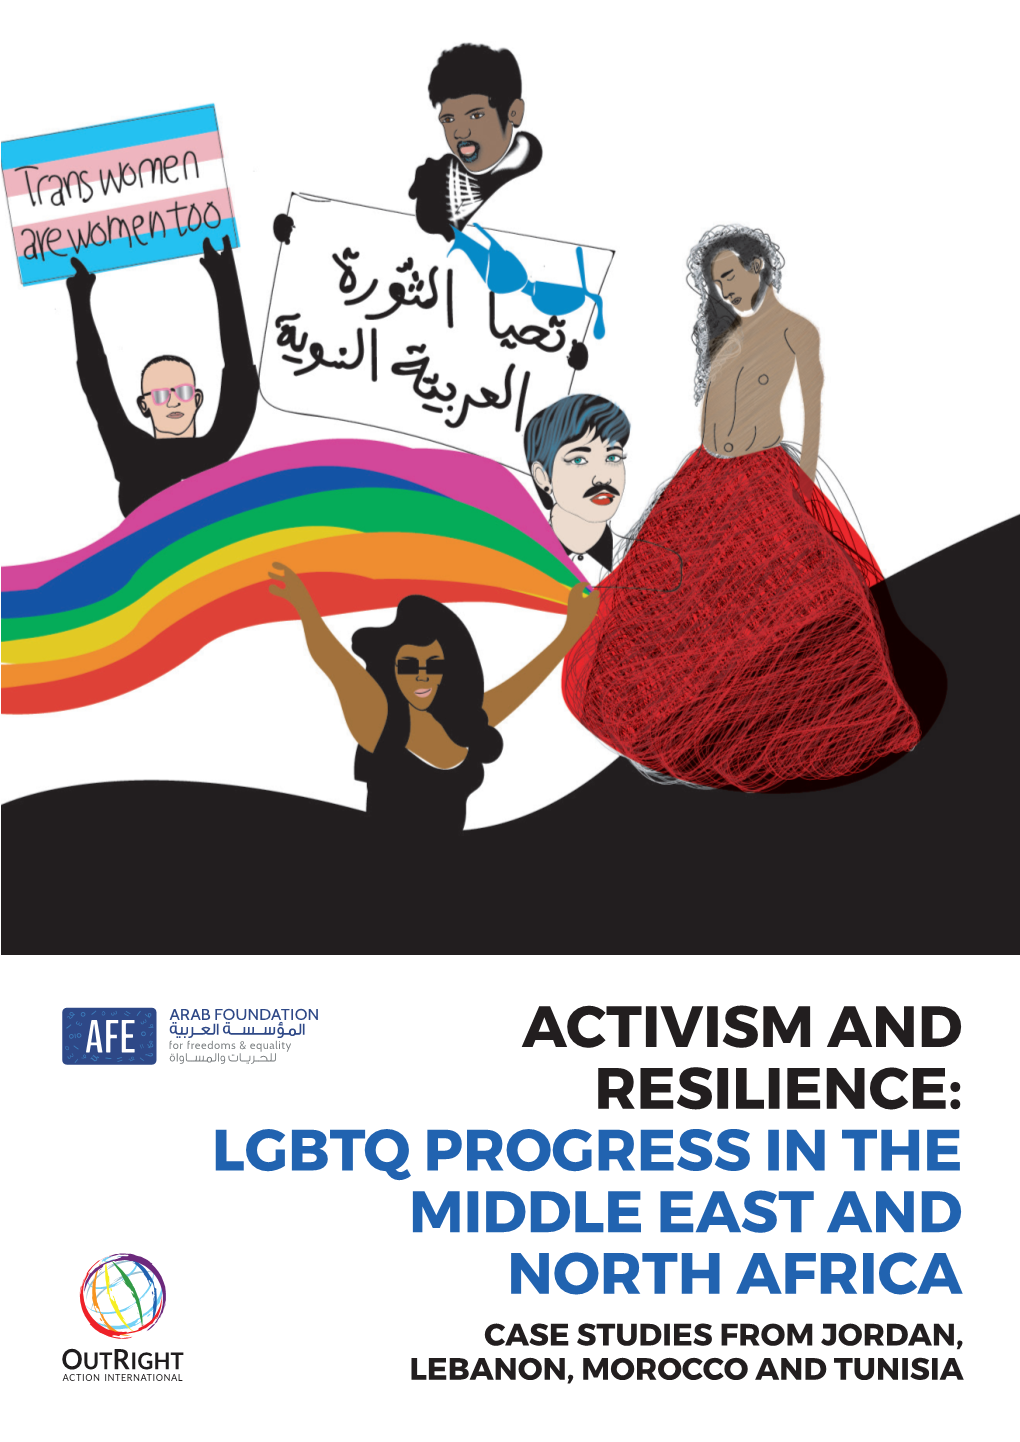 Lgbtq Progress in the Middle East and North Africa Case Studies from Jordan, Lebanon, Morocco and Tunisia